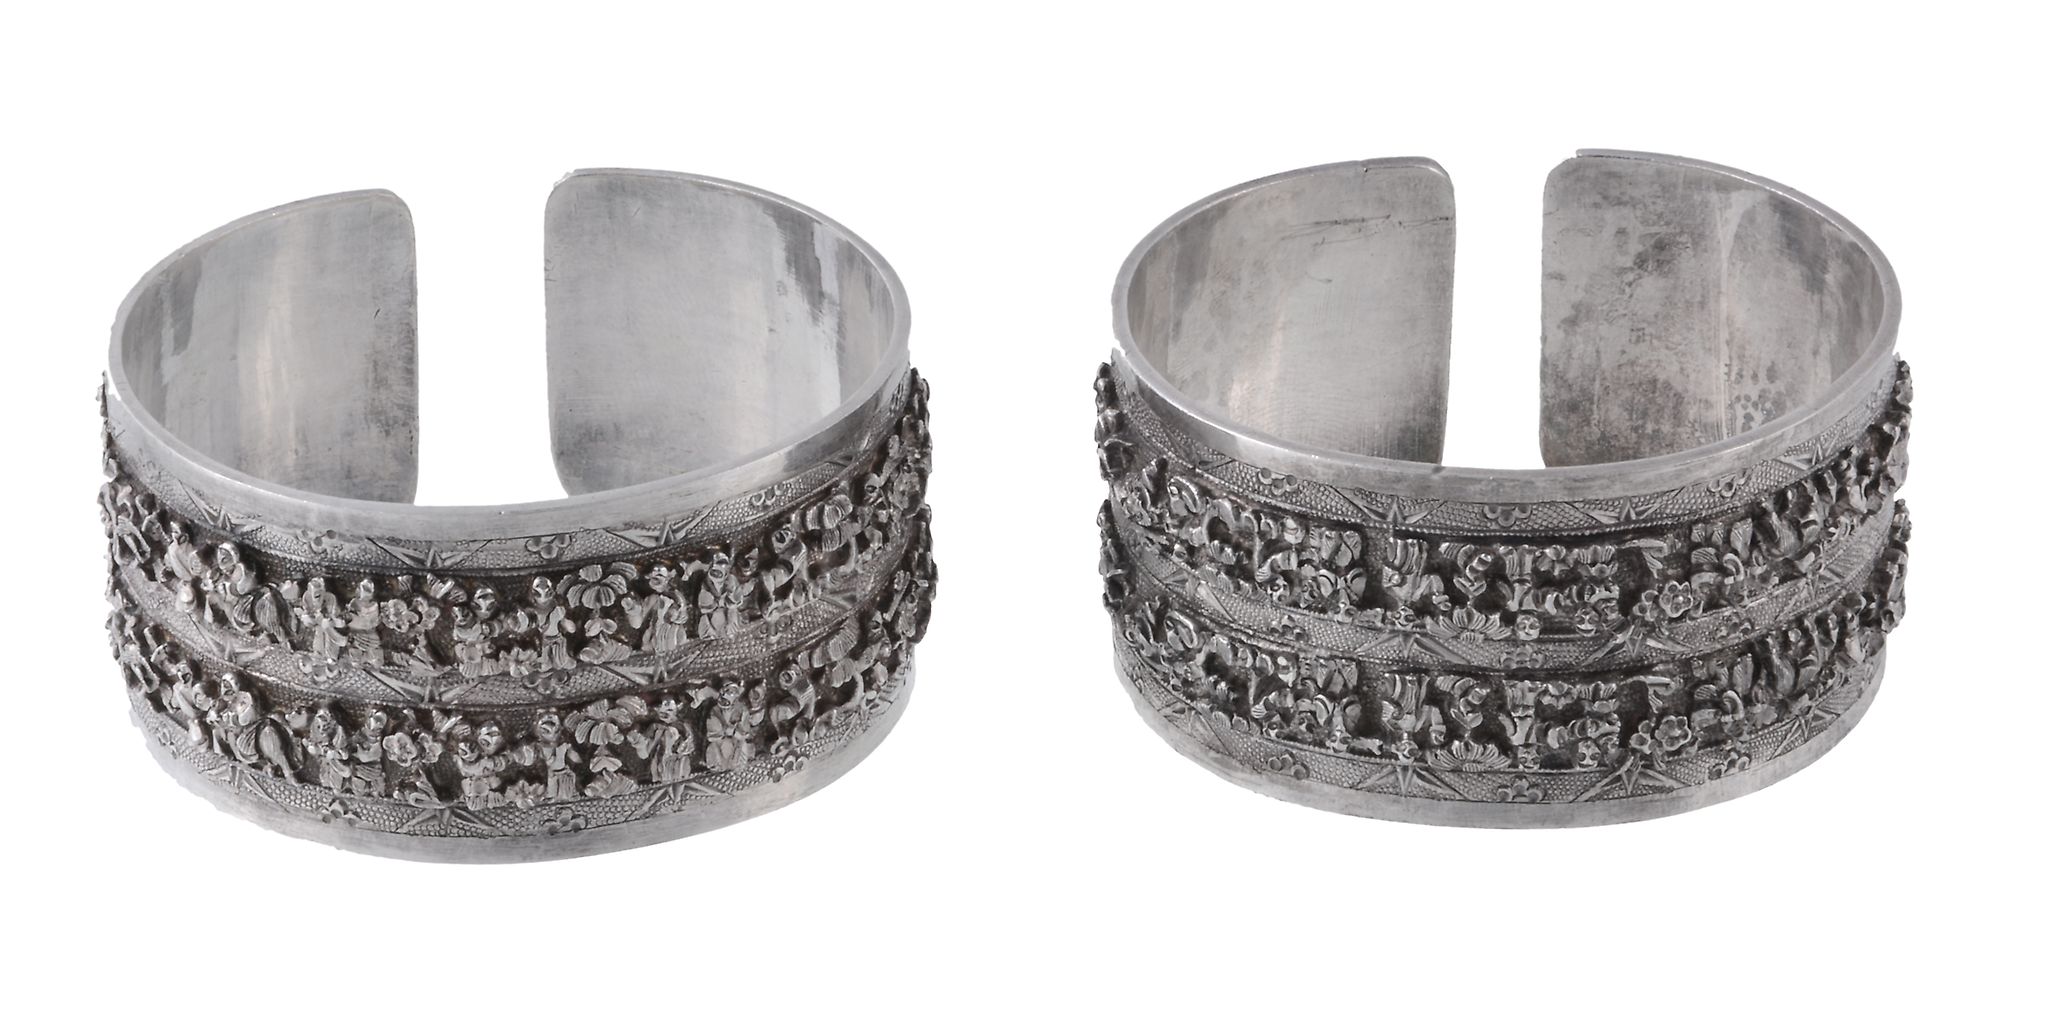 A pair of Chinese export silver cuff bangles by Yu Zhen, Xiamen  A pair of Chinese export silver